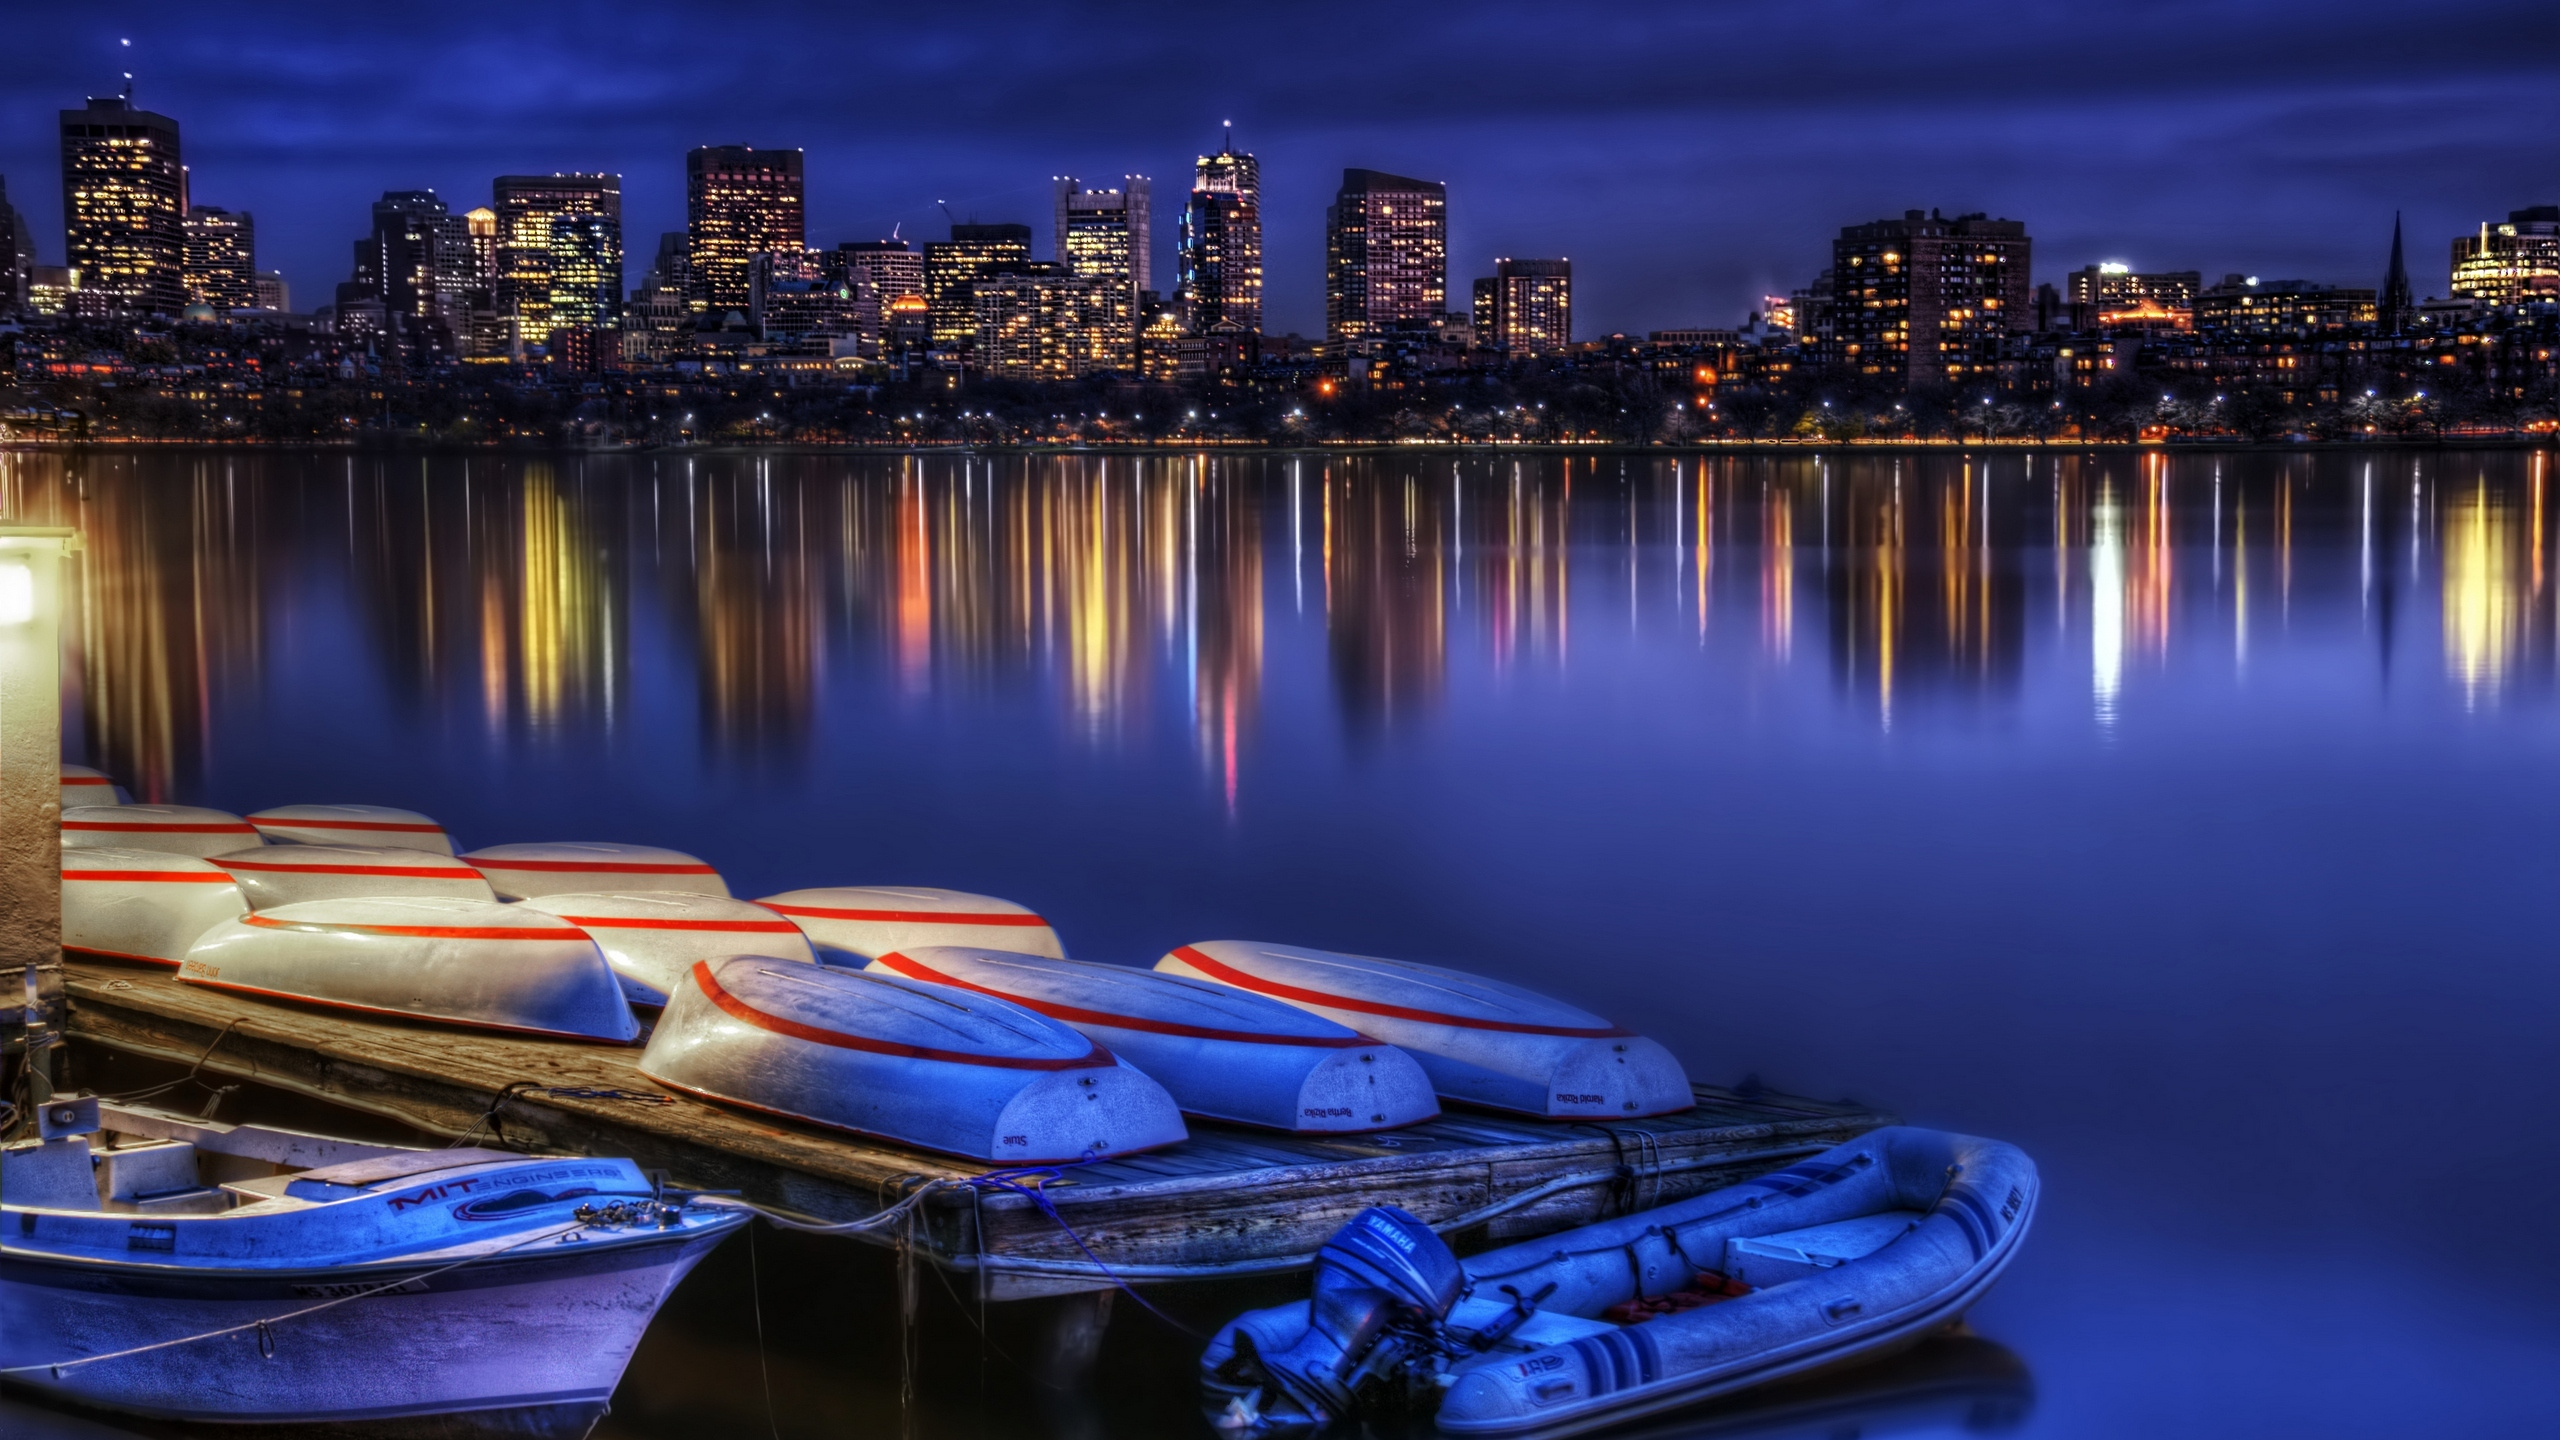 Blue and White Boat on Water During Night Time. Wallpaper in 2560x1440 Resolution